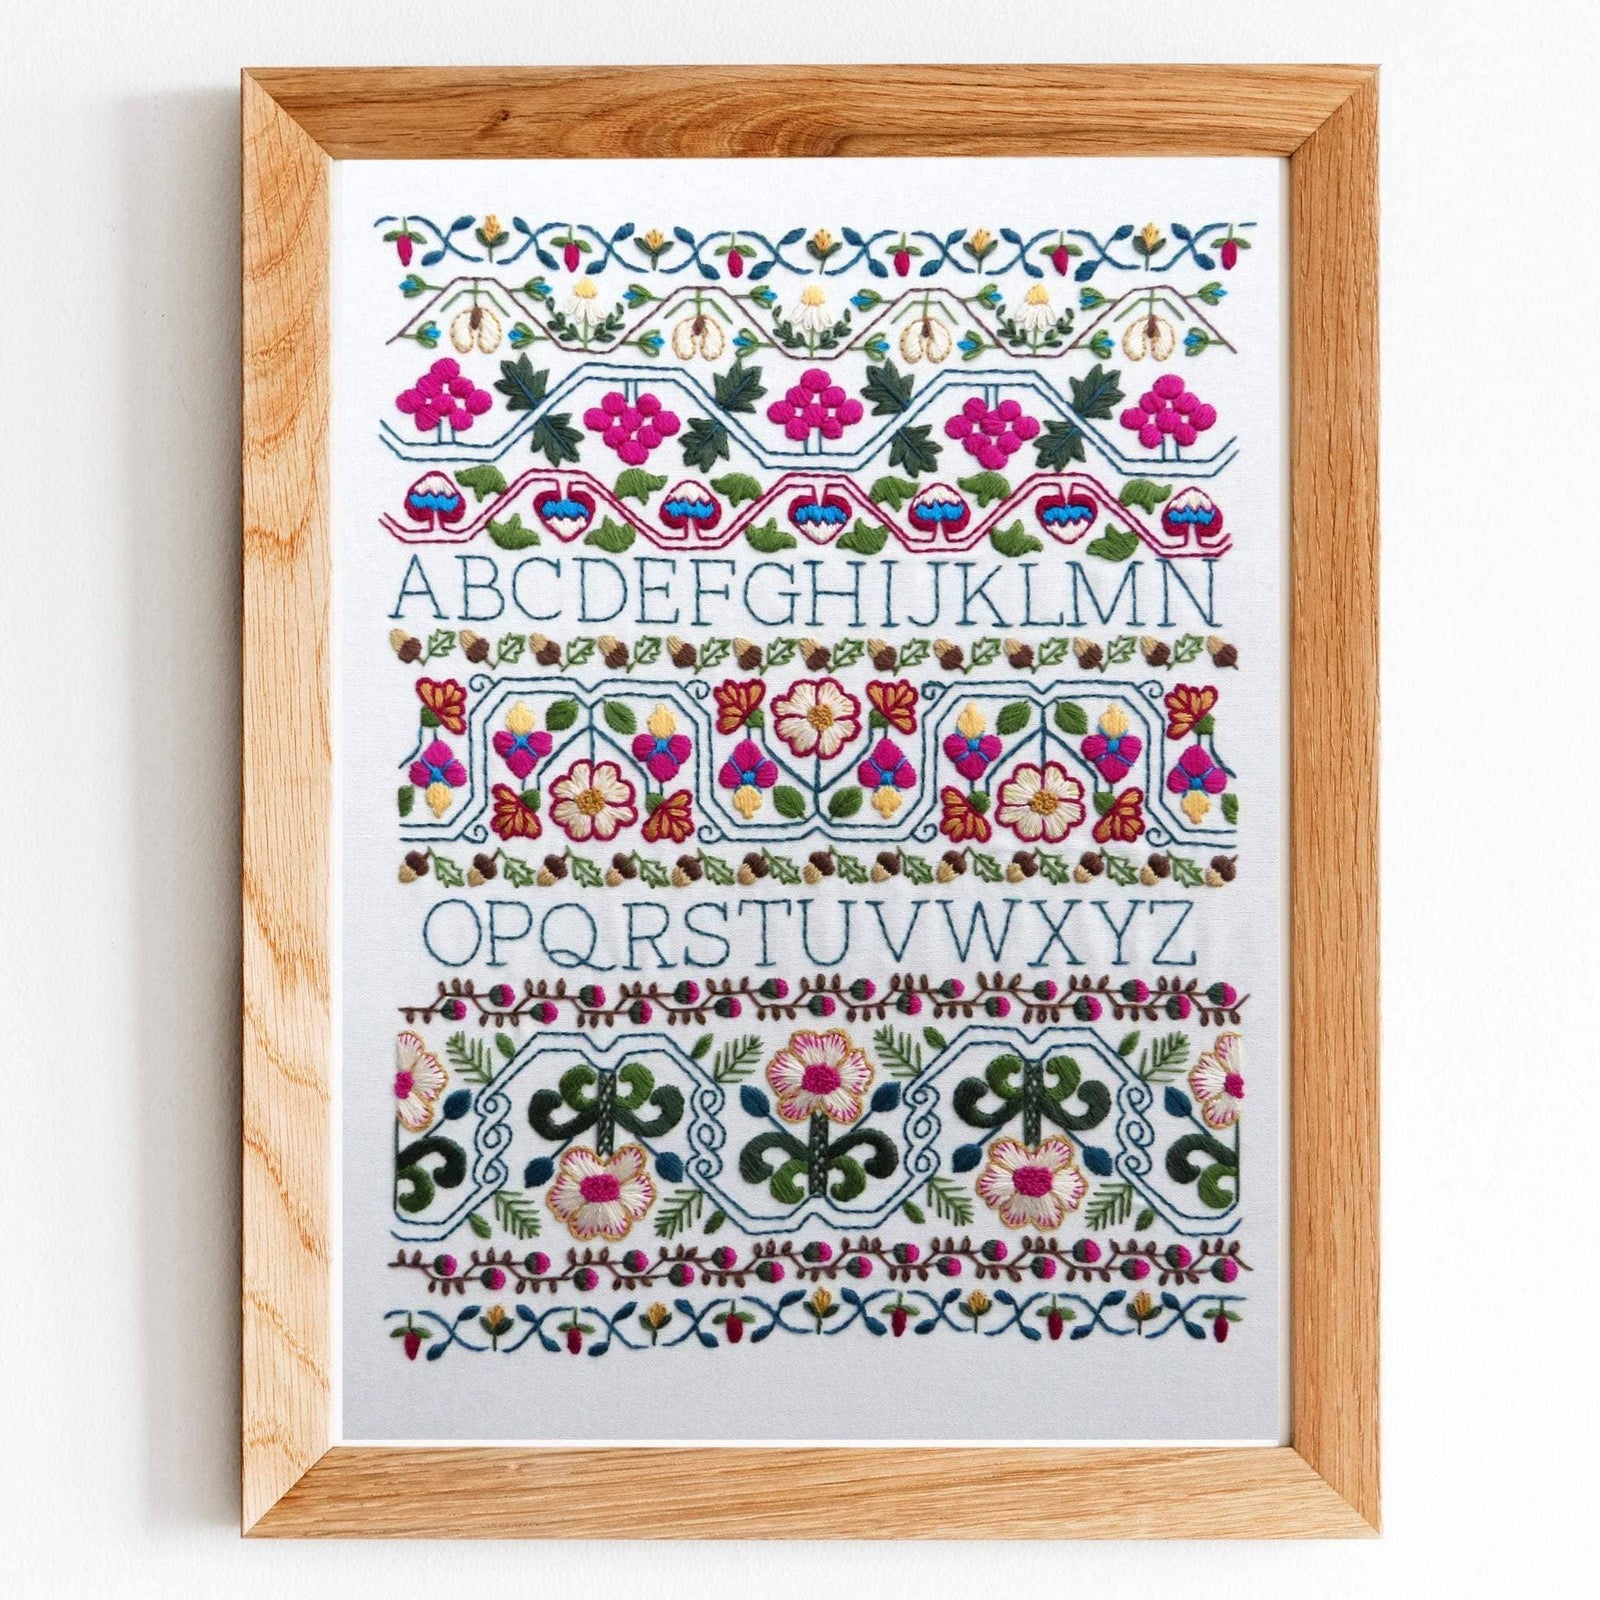 18th Century Sampler, Pre Printed Embroidery Fabric Pattern , Pre Printed Fabric Pattern , StitchDoodles , Embroidery, embroidery hoop, embroidery hoop kit, Embroidery Kit, embroidery kit for adults, embroidery kit fro beginners, embroidery pattern, hand embroidery, hand embroidery fabric, hand embroidery seat frame, modern embroidery kits, nurge embroidery hoop, PDF pattern, Printed Pattern , StitchDoodles , shop.stitchdoodles.com